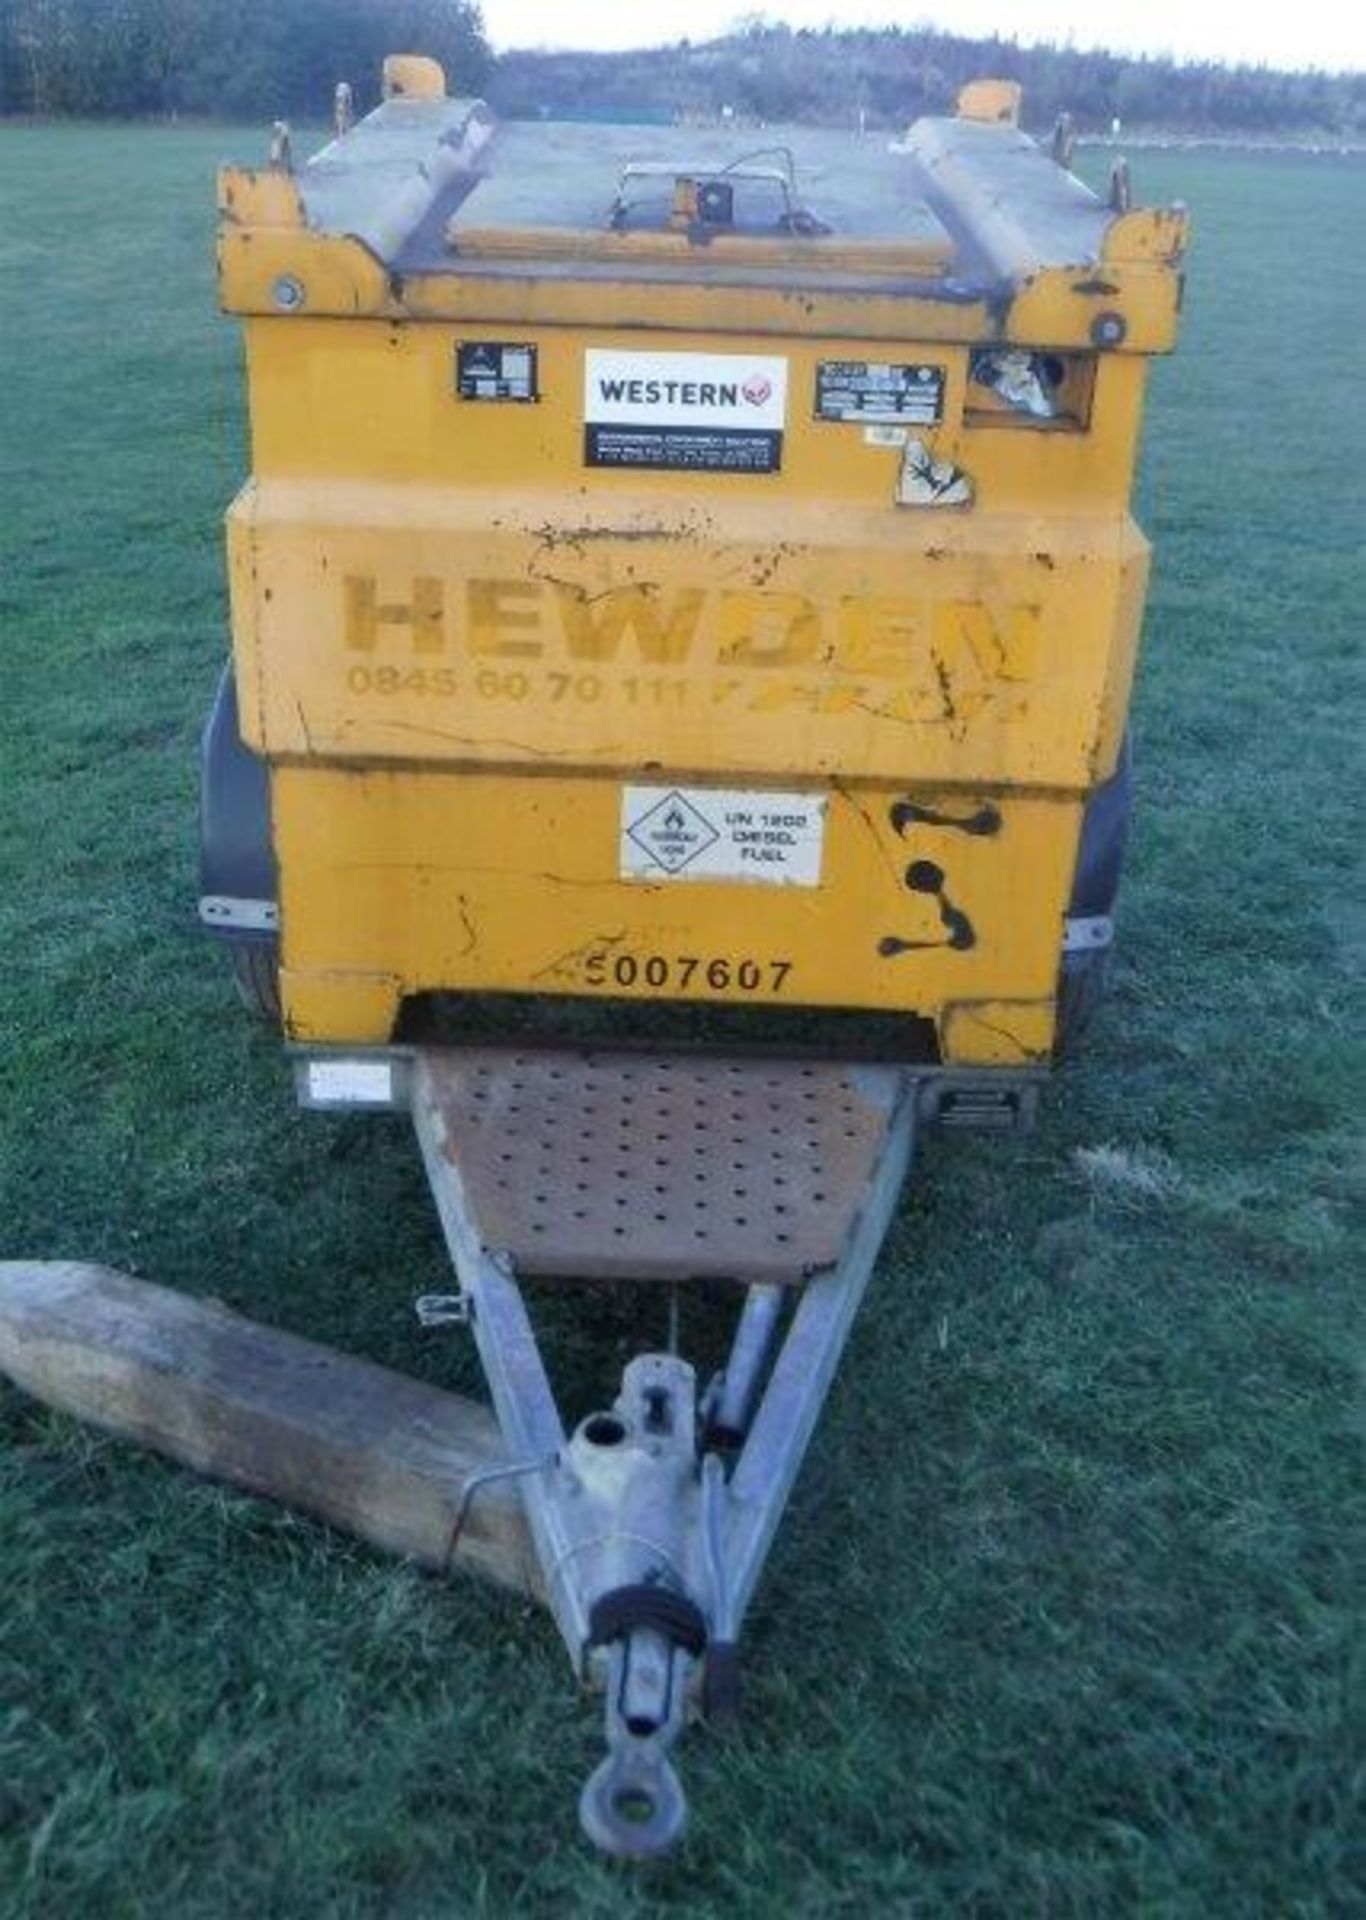 2008 WESTERN fastow 950ltr trans cube fuel bowser S/N 070505413997 (5007607) - Image 3 of 20